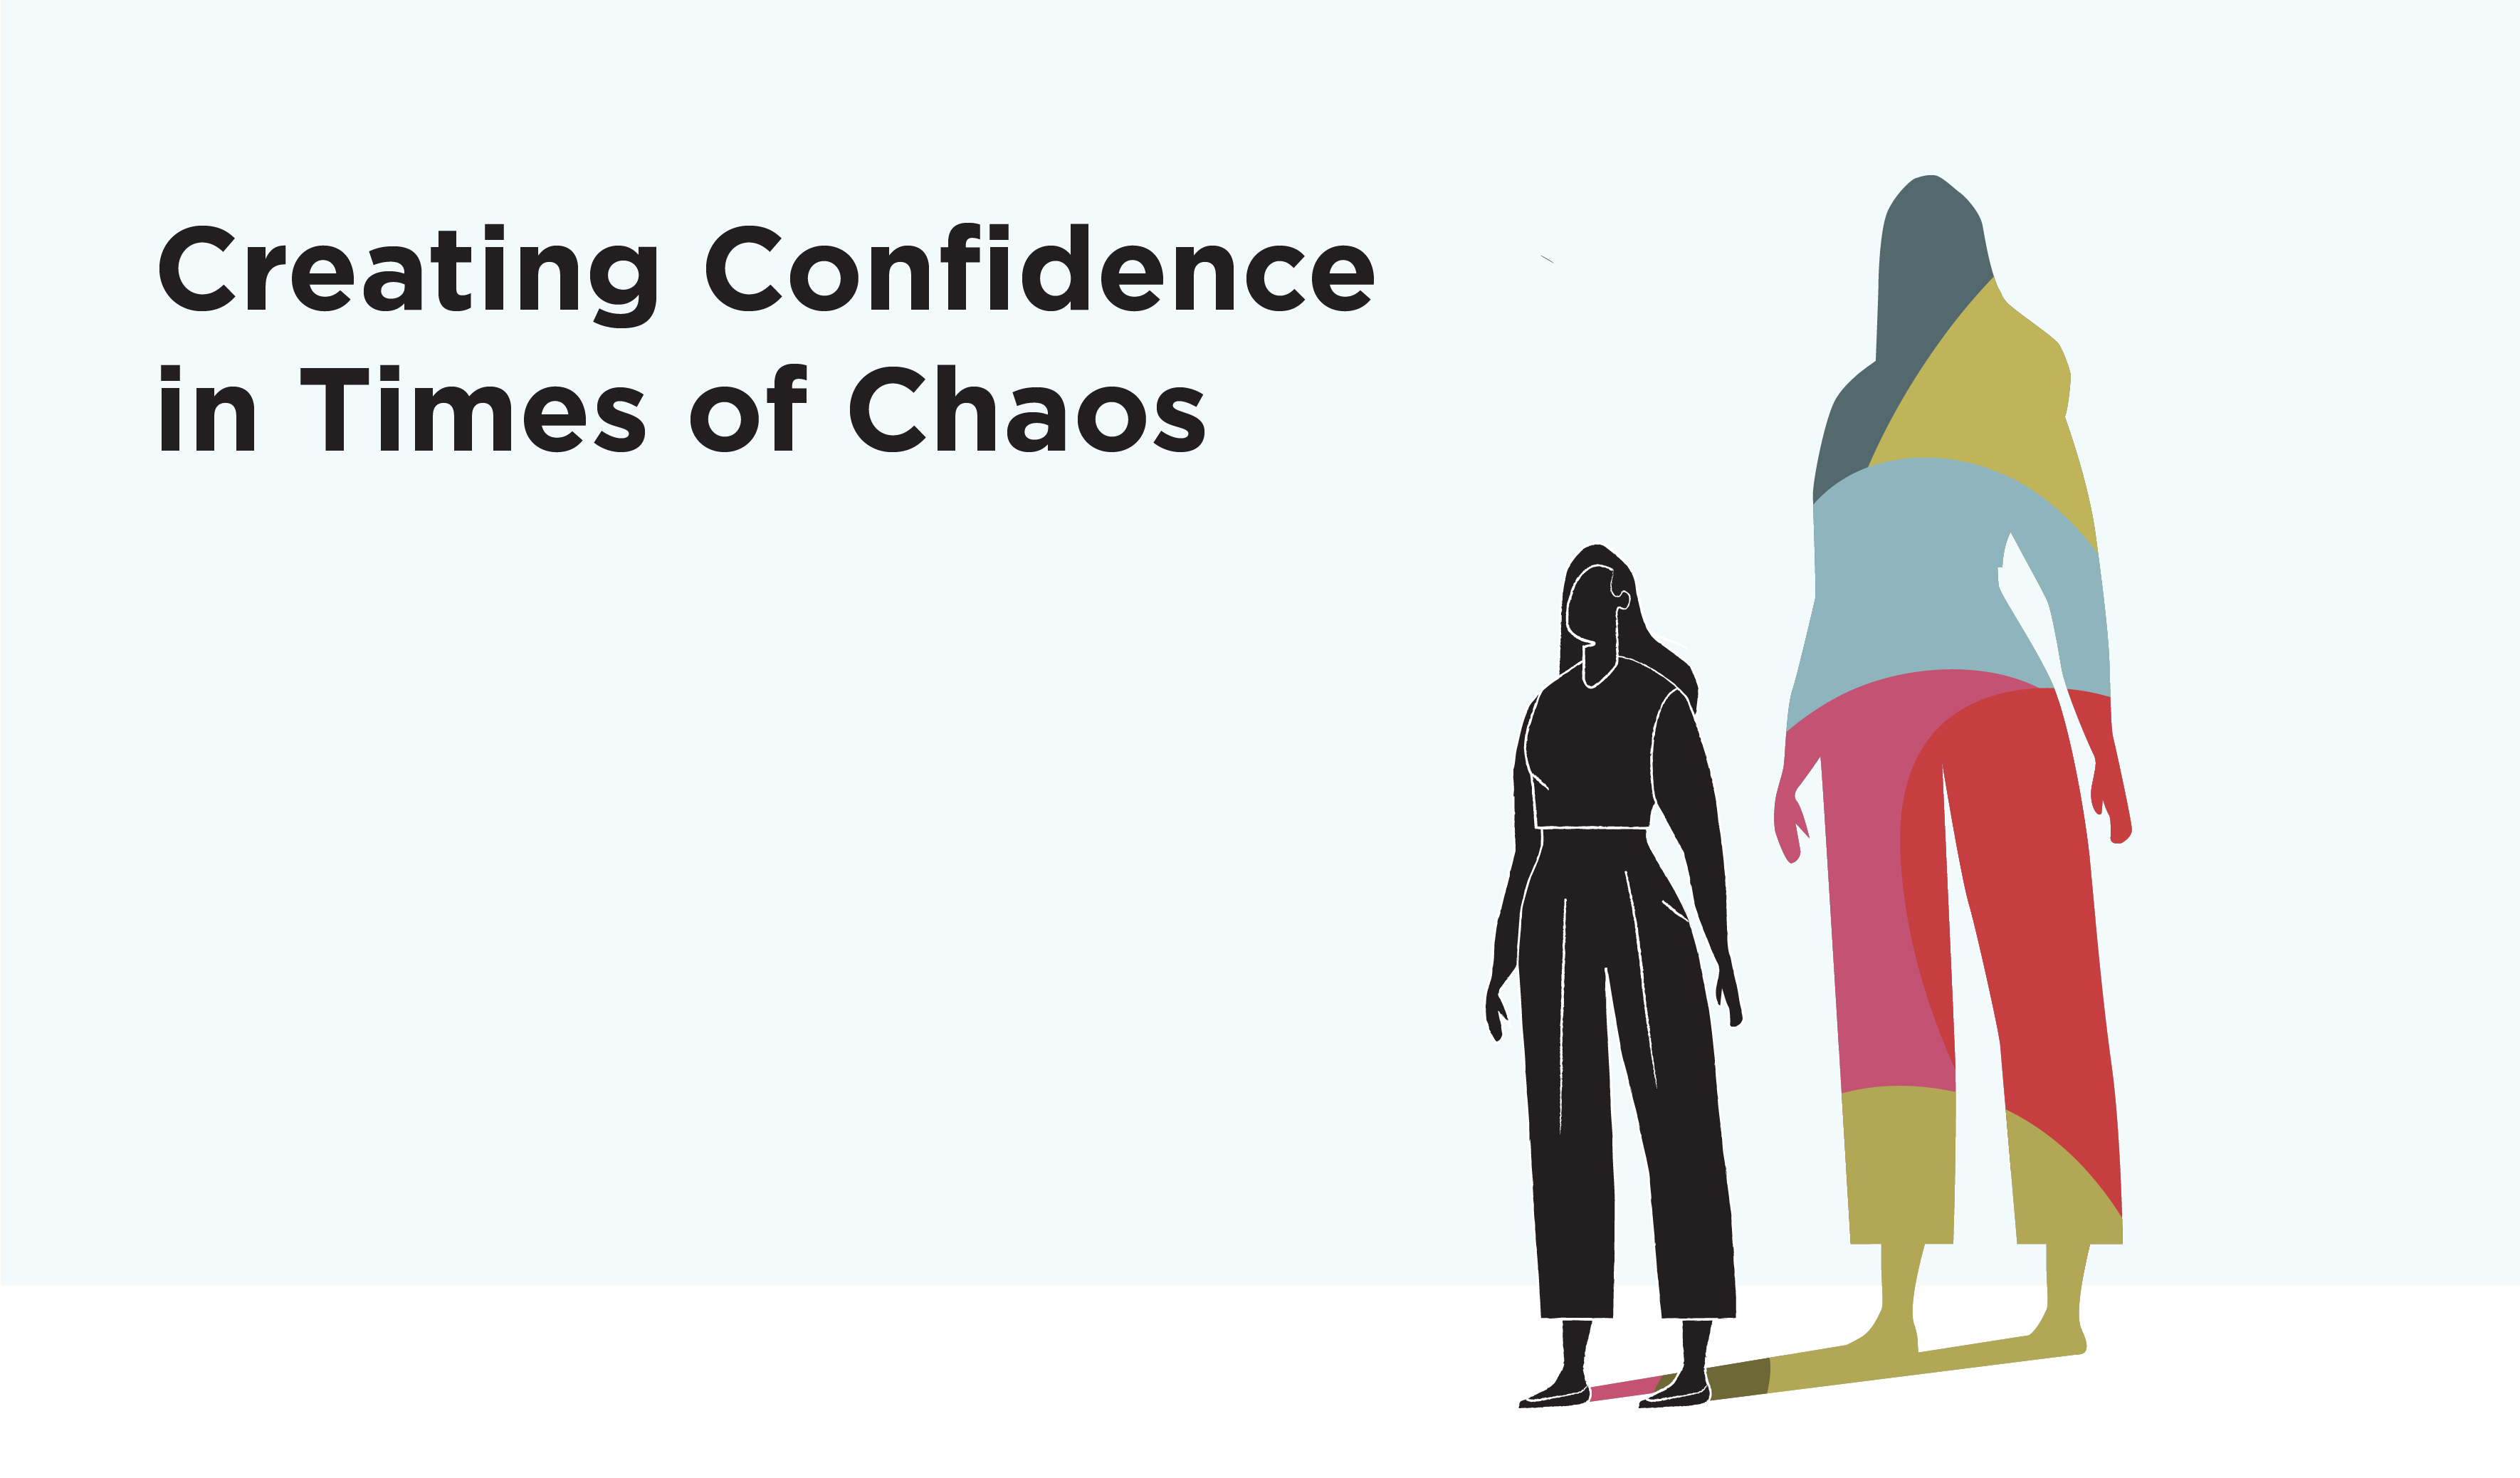 Cover Image for How to Use Design Thinking to Create Confidence in Times of Chaos